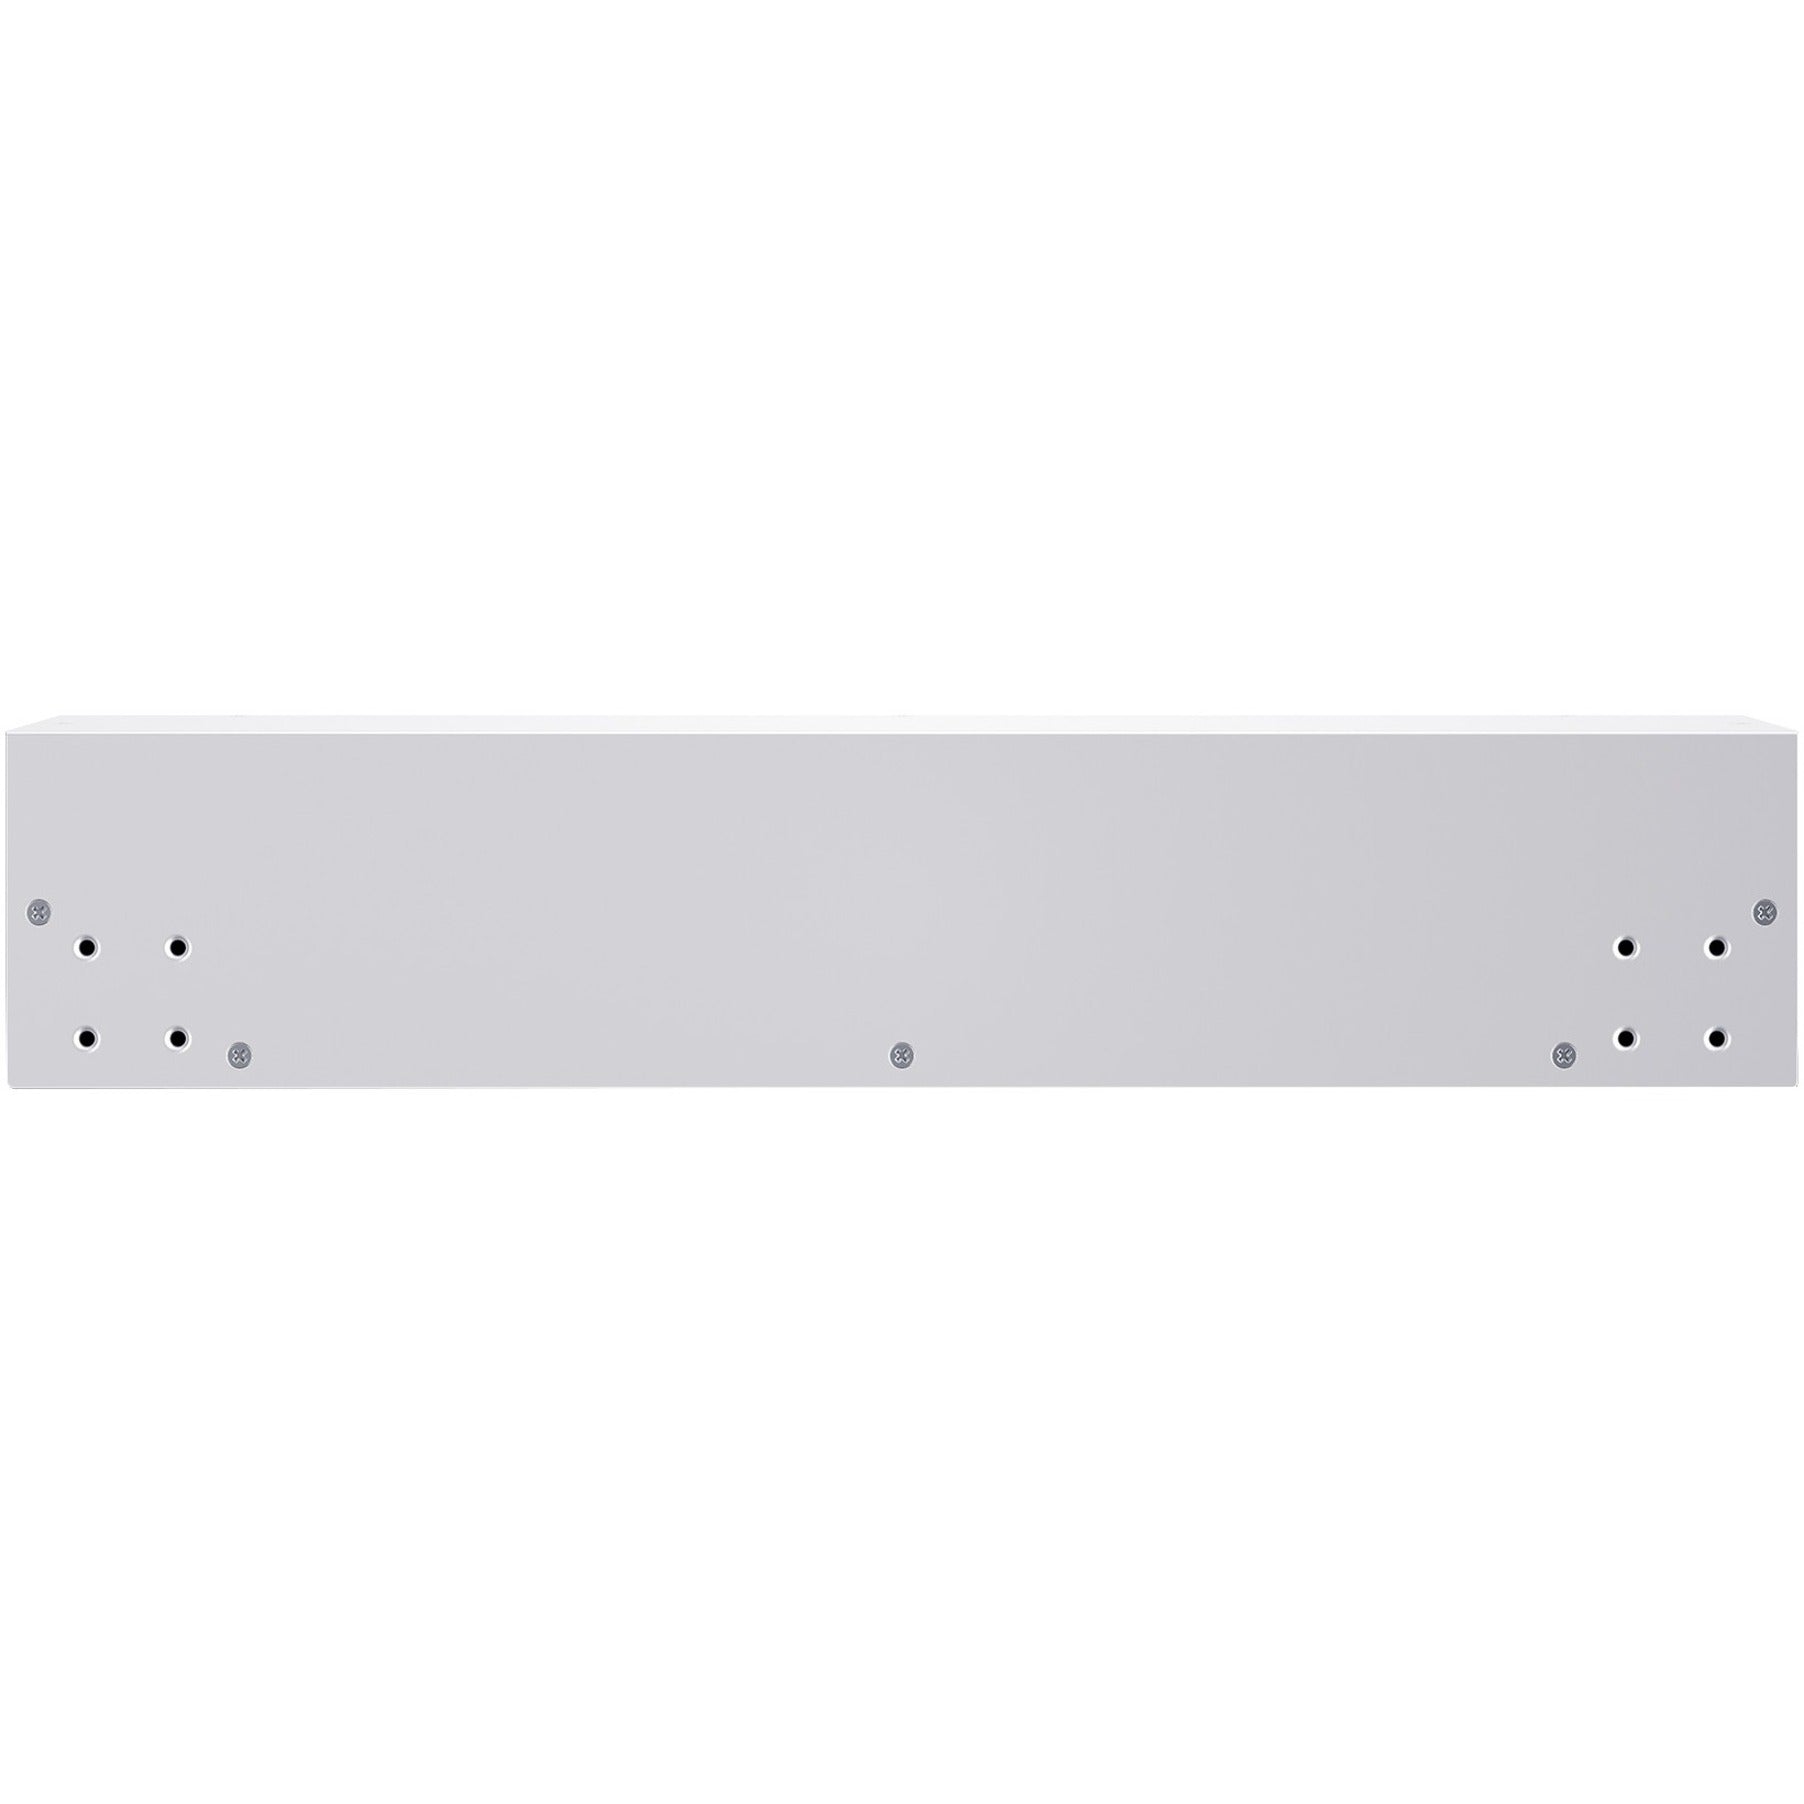 CyberPower MBP63A2 3-Outlet PDU Maintenance Bypass UPS, 208V 63A, 3-Year Warranty